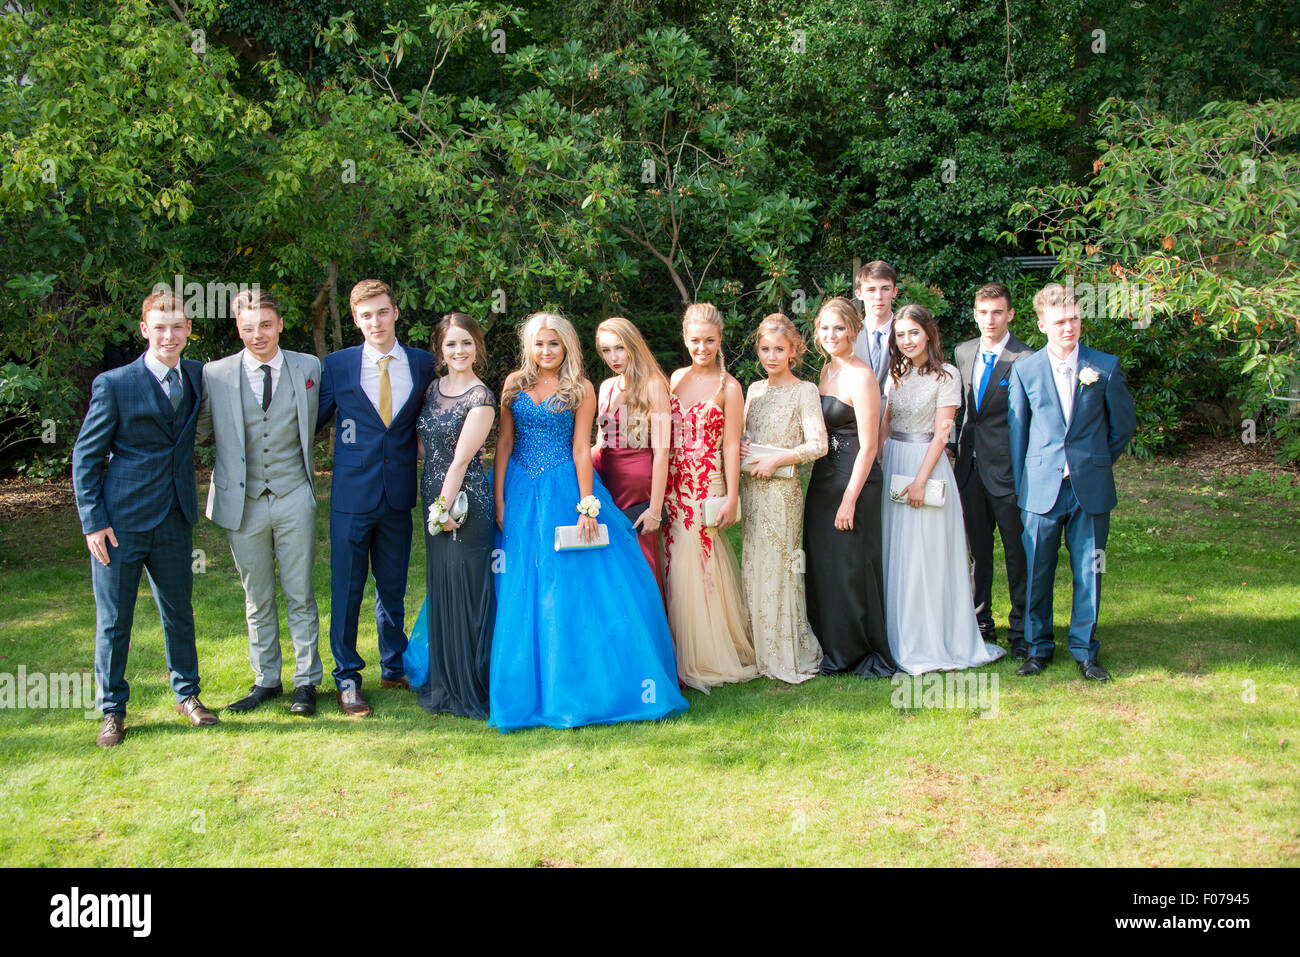 Group of teenage boys and girls posing in prom dress, Englefield Green, Surrey, England, United Kingdom Stock Photo